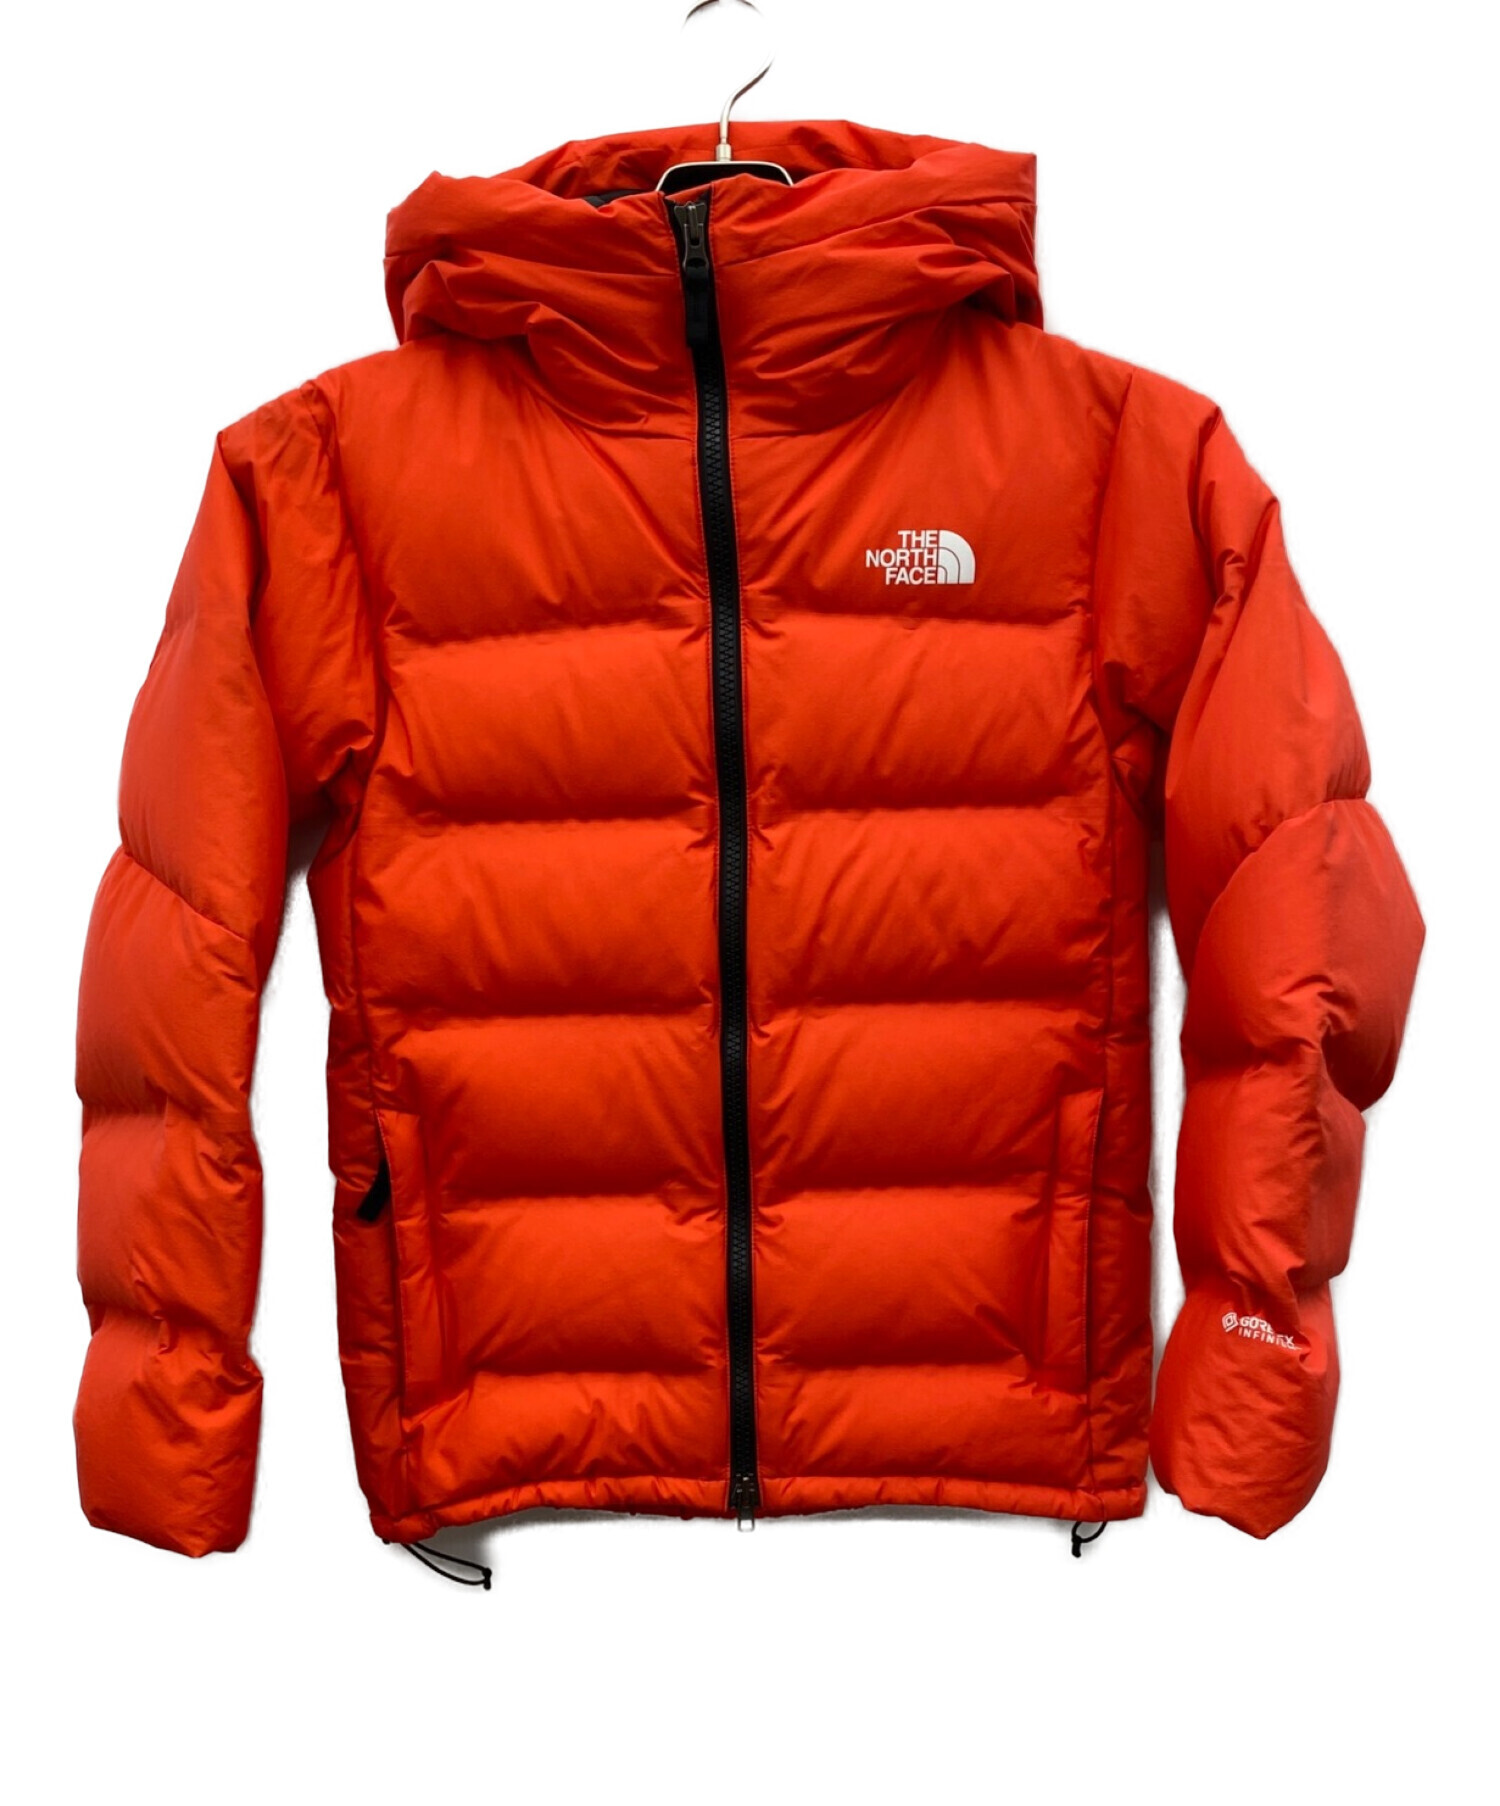 youji【最終処分価格】THE NORTH FACE ビレイヤパーカ